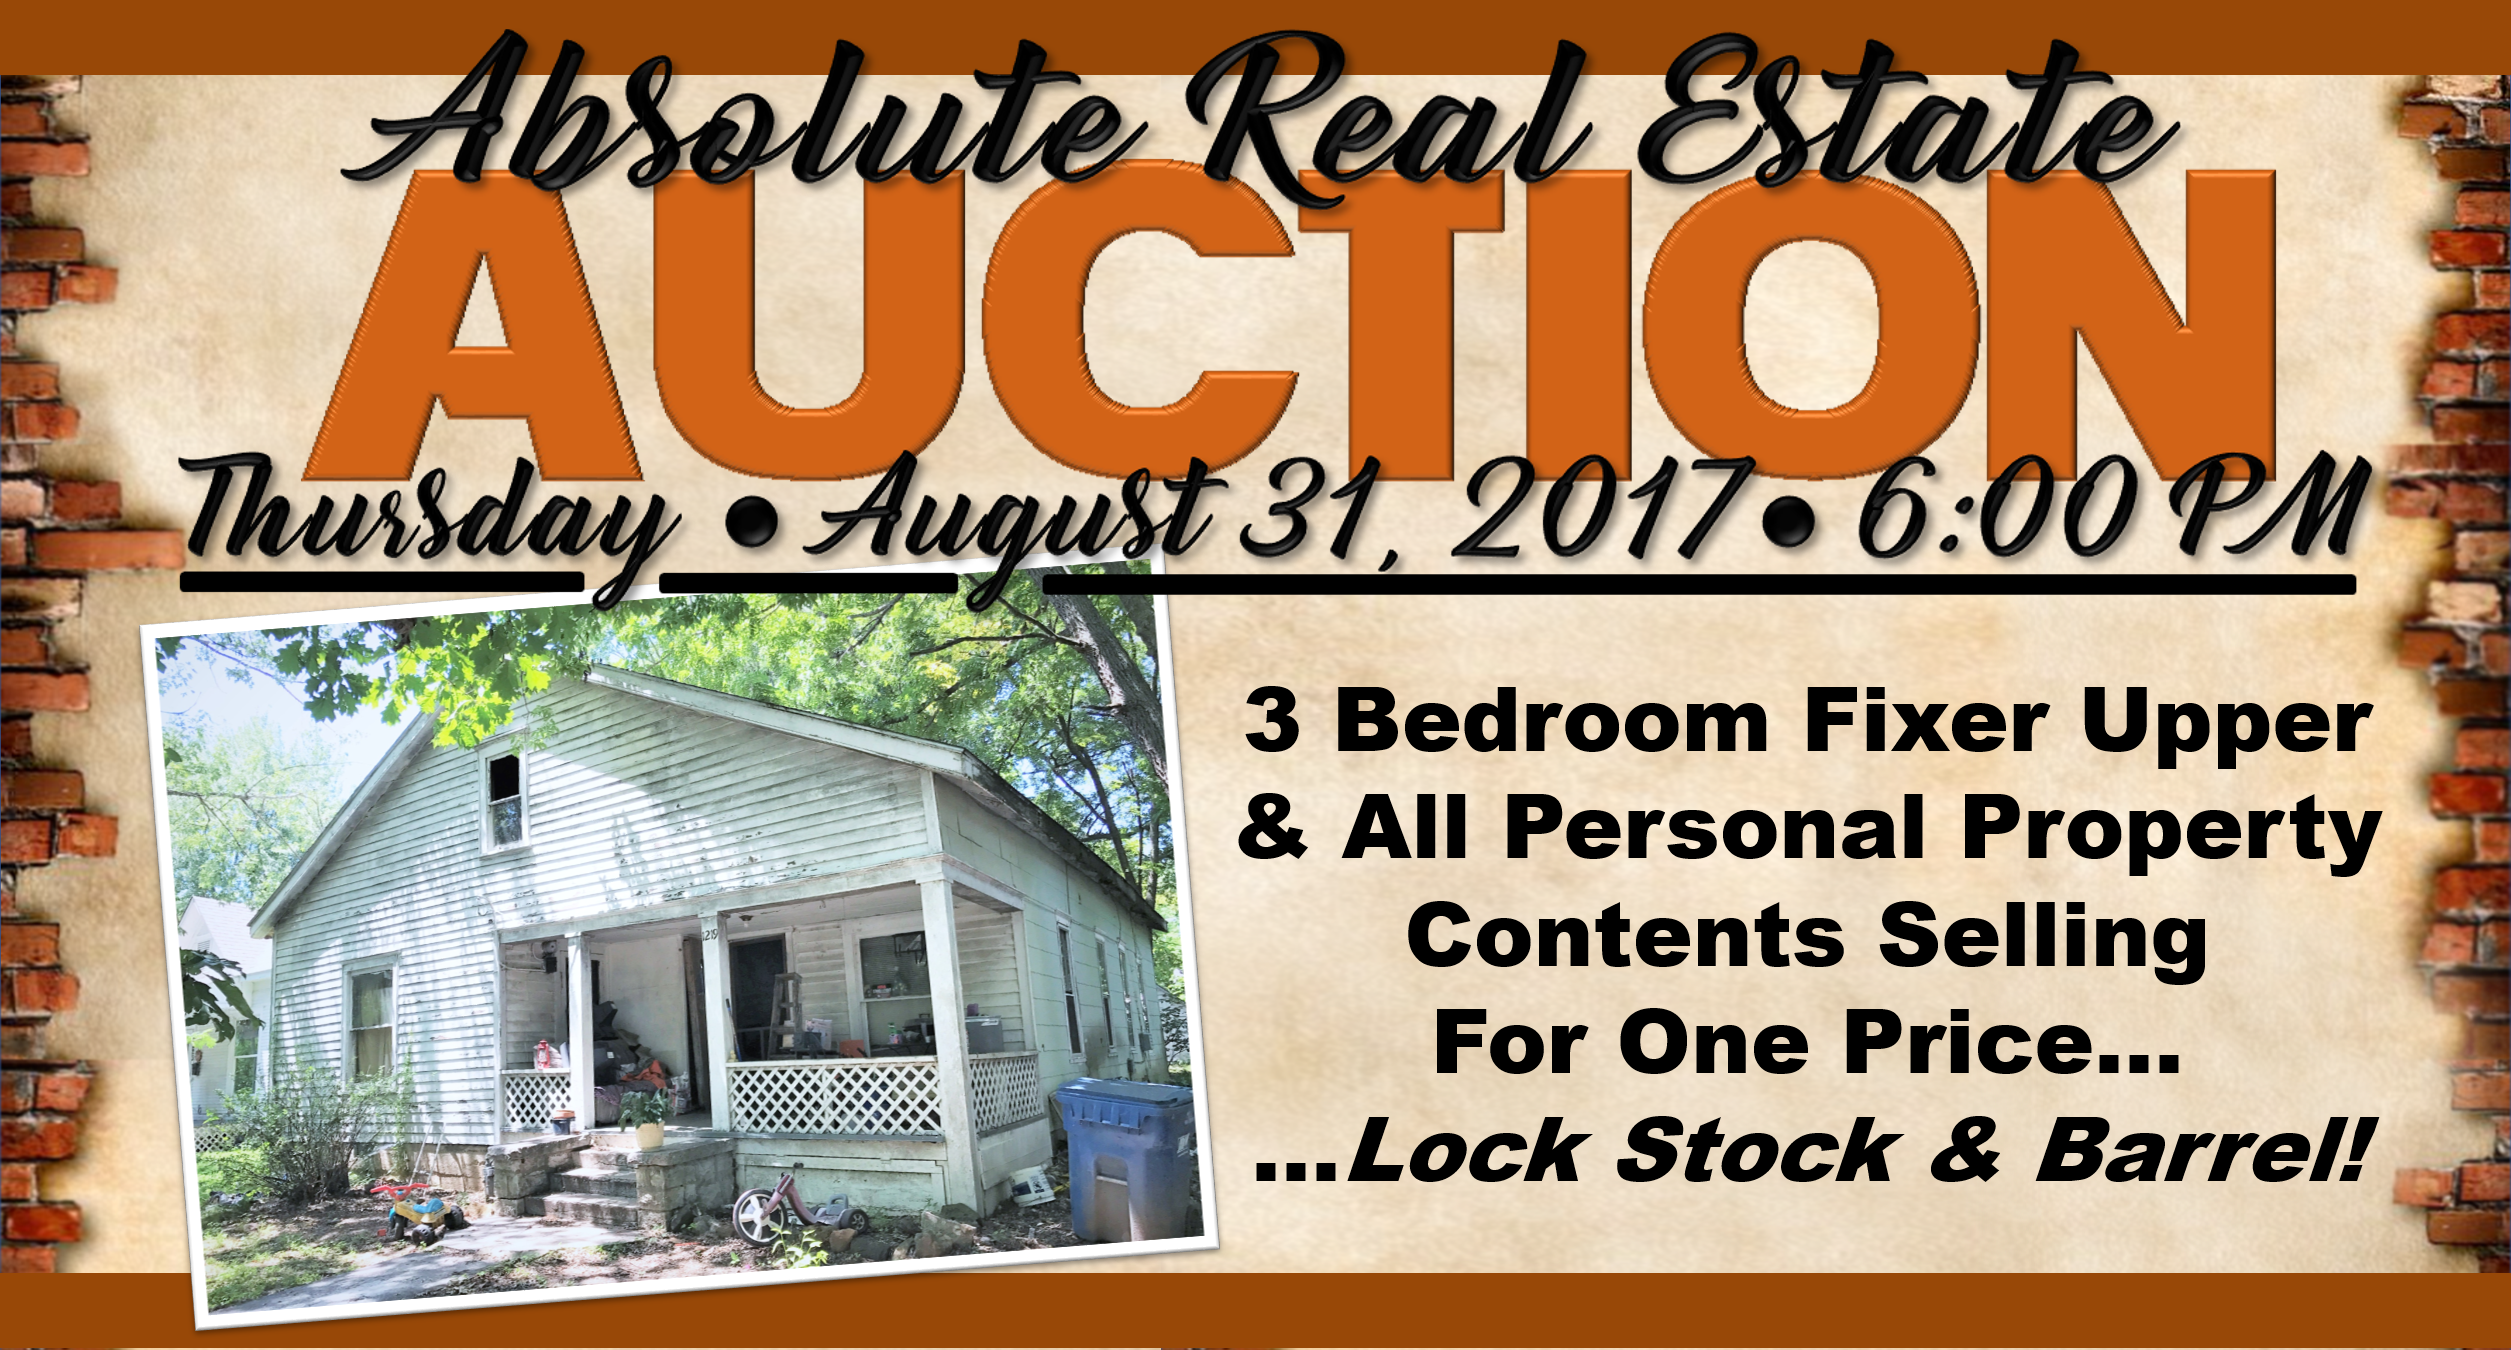 ABSOLUTE REAL ESTATE AUCTION